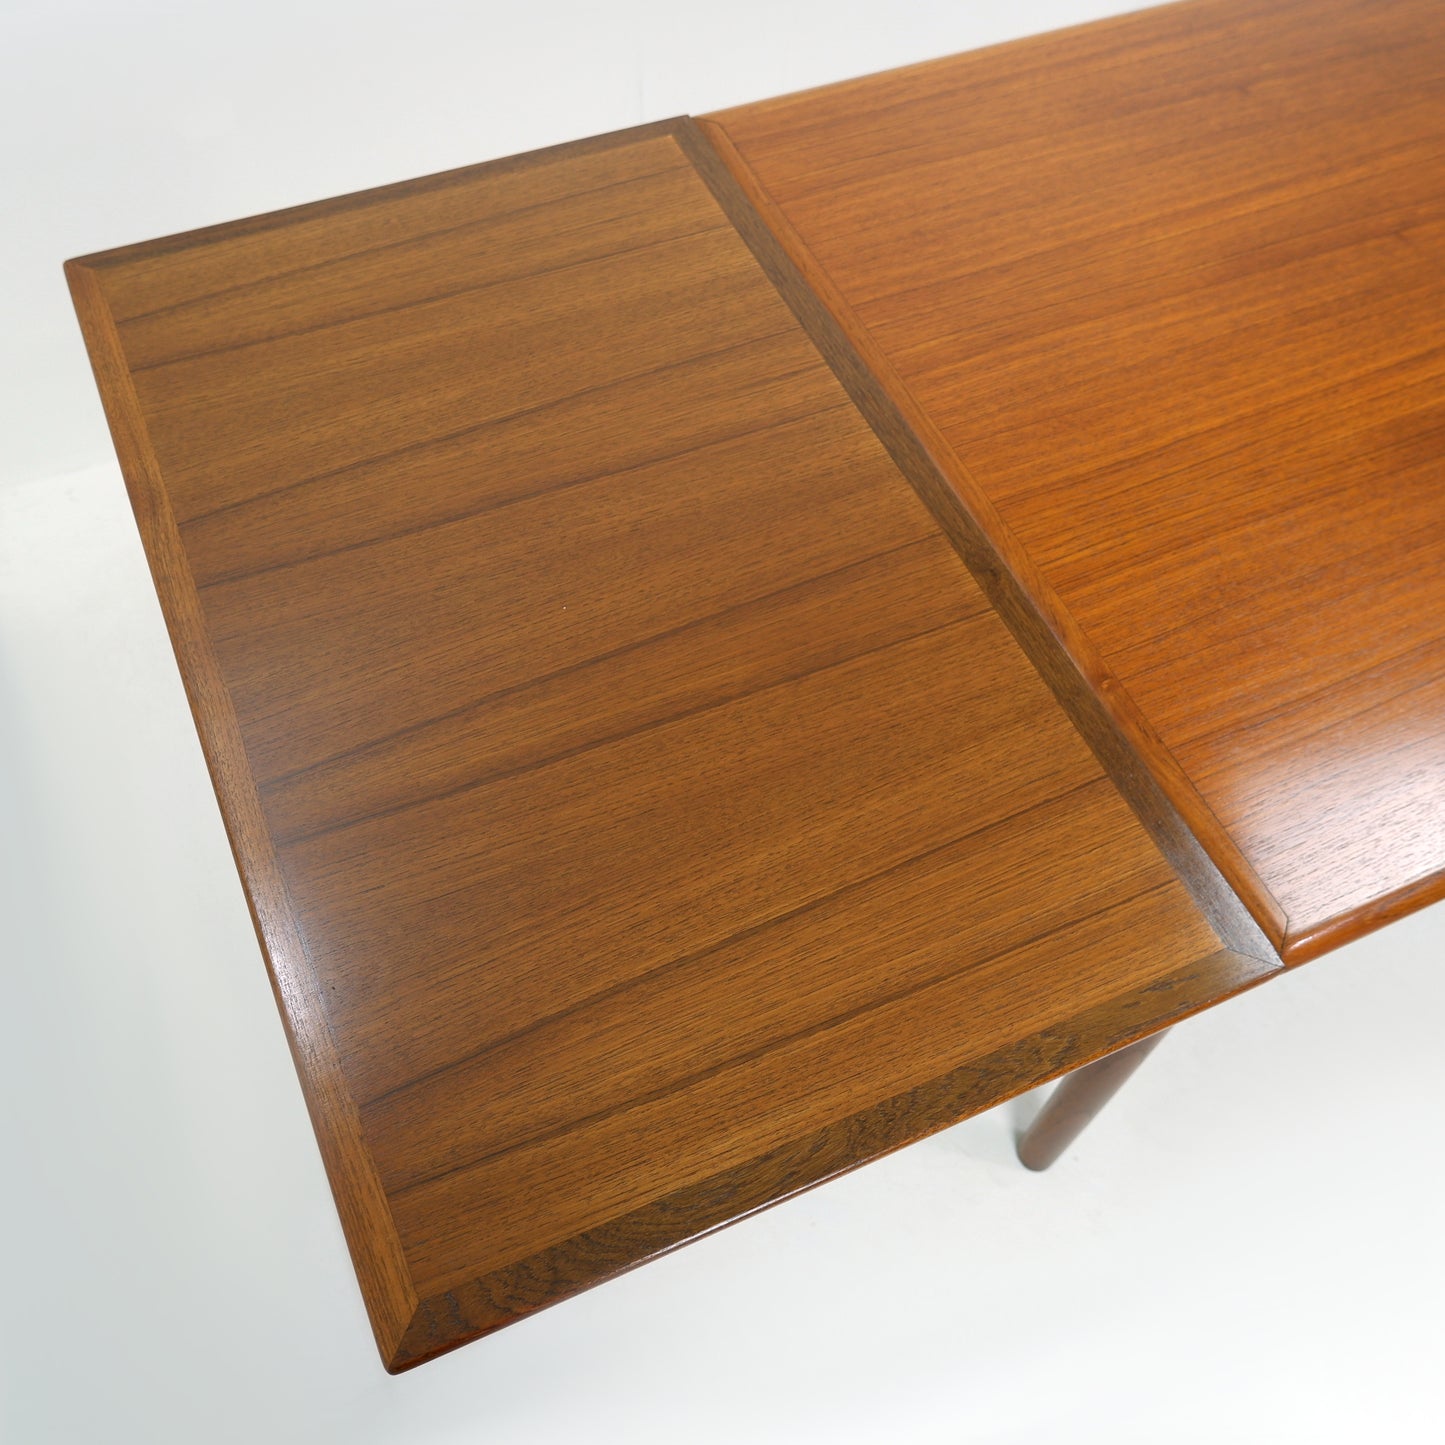 Extendable Draw Leaf Dining Table in Teak - Seats 4 to 8 - Danish Modern - Mid Century